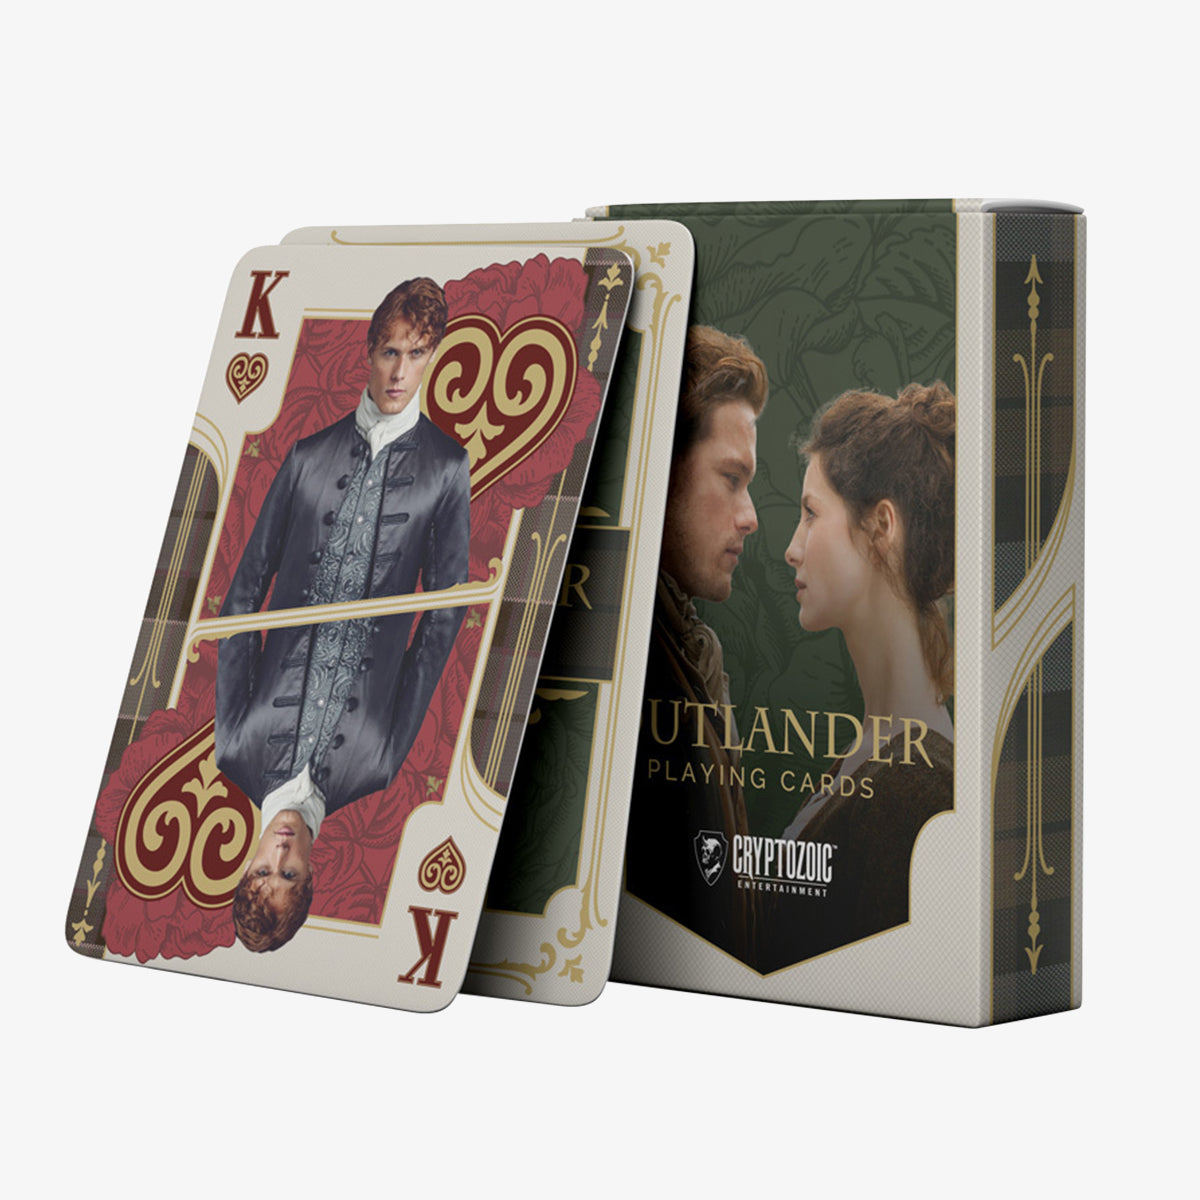 Beringer x Cynthia Rowley Wild & Refined Playing Cards